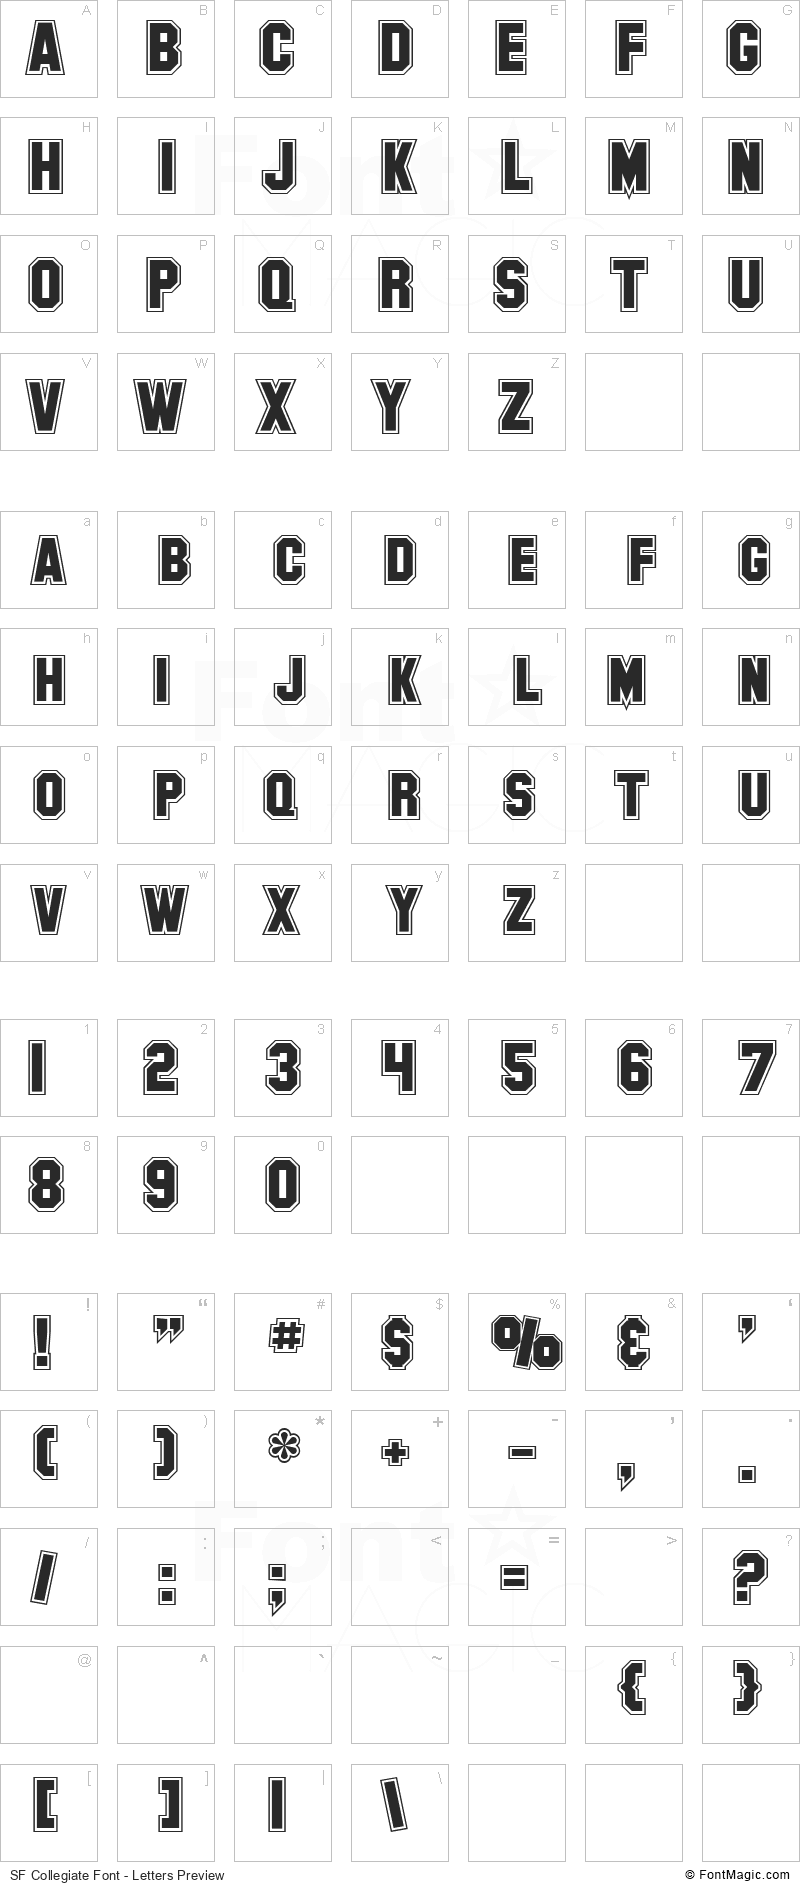 SF Collegiate Font - All Latters Preview Chart